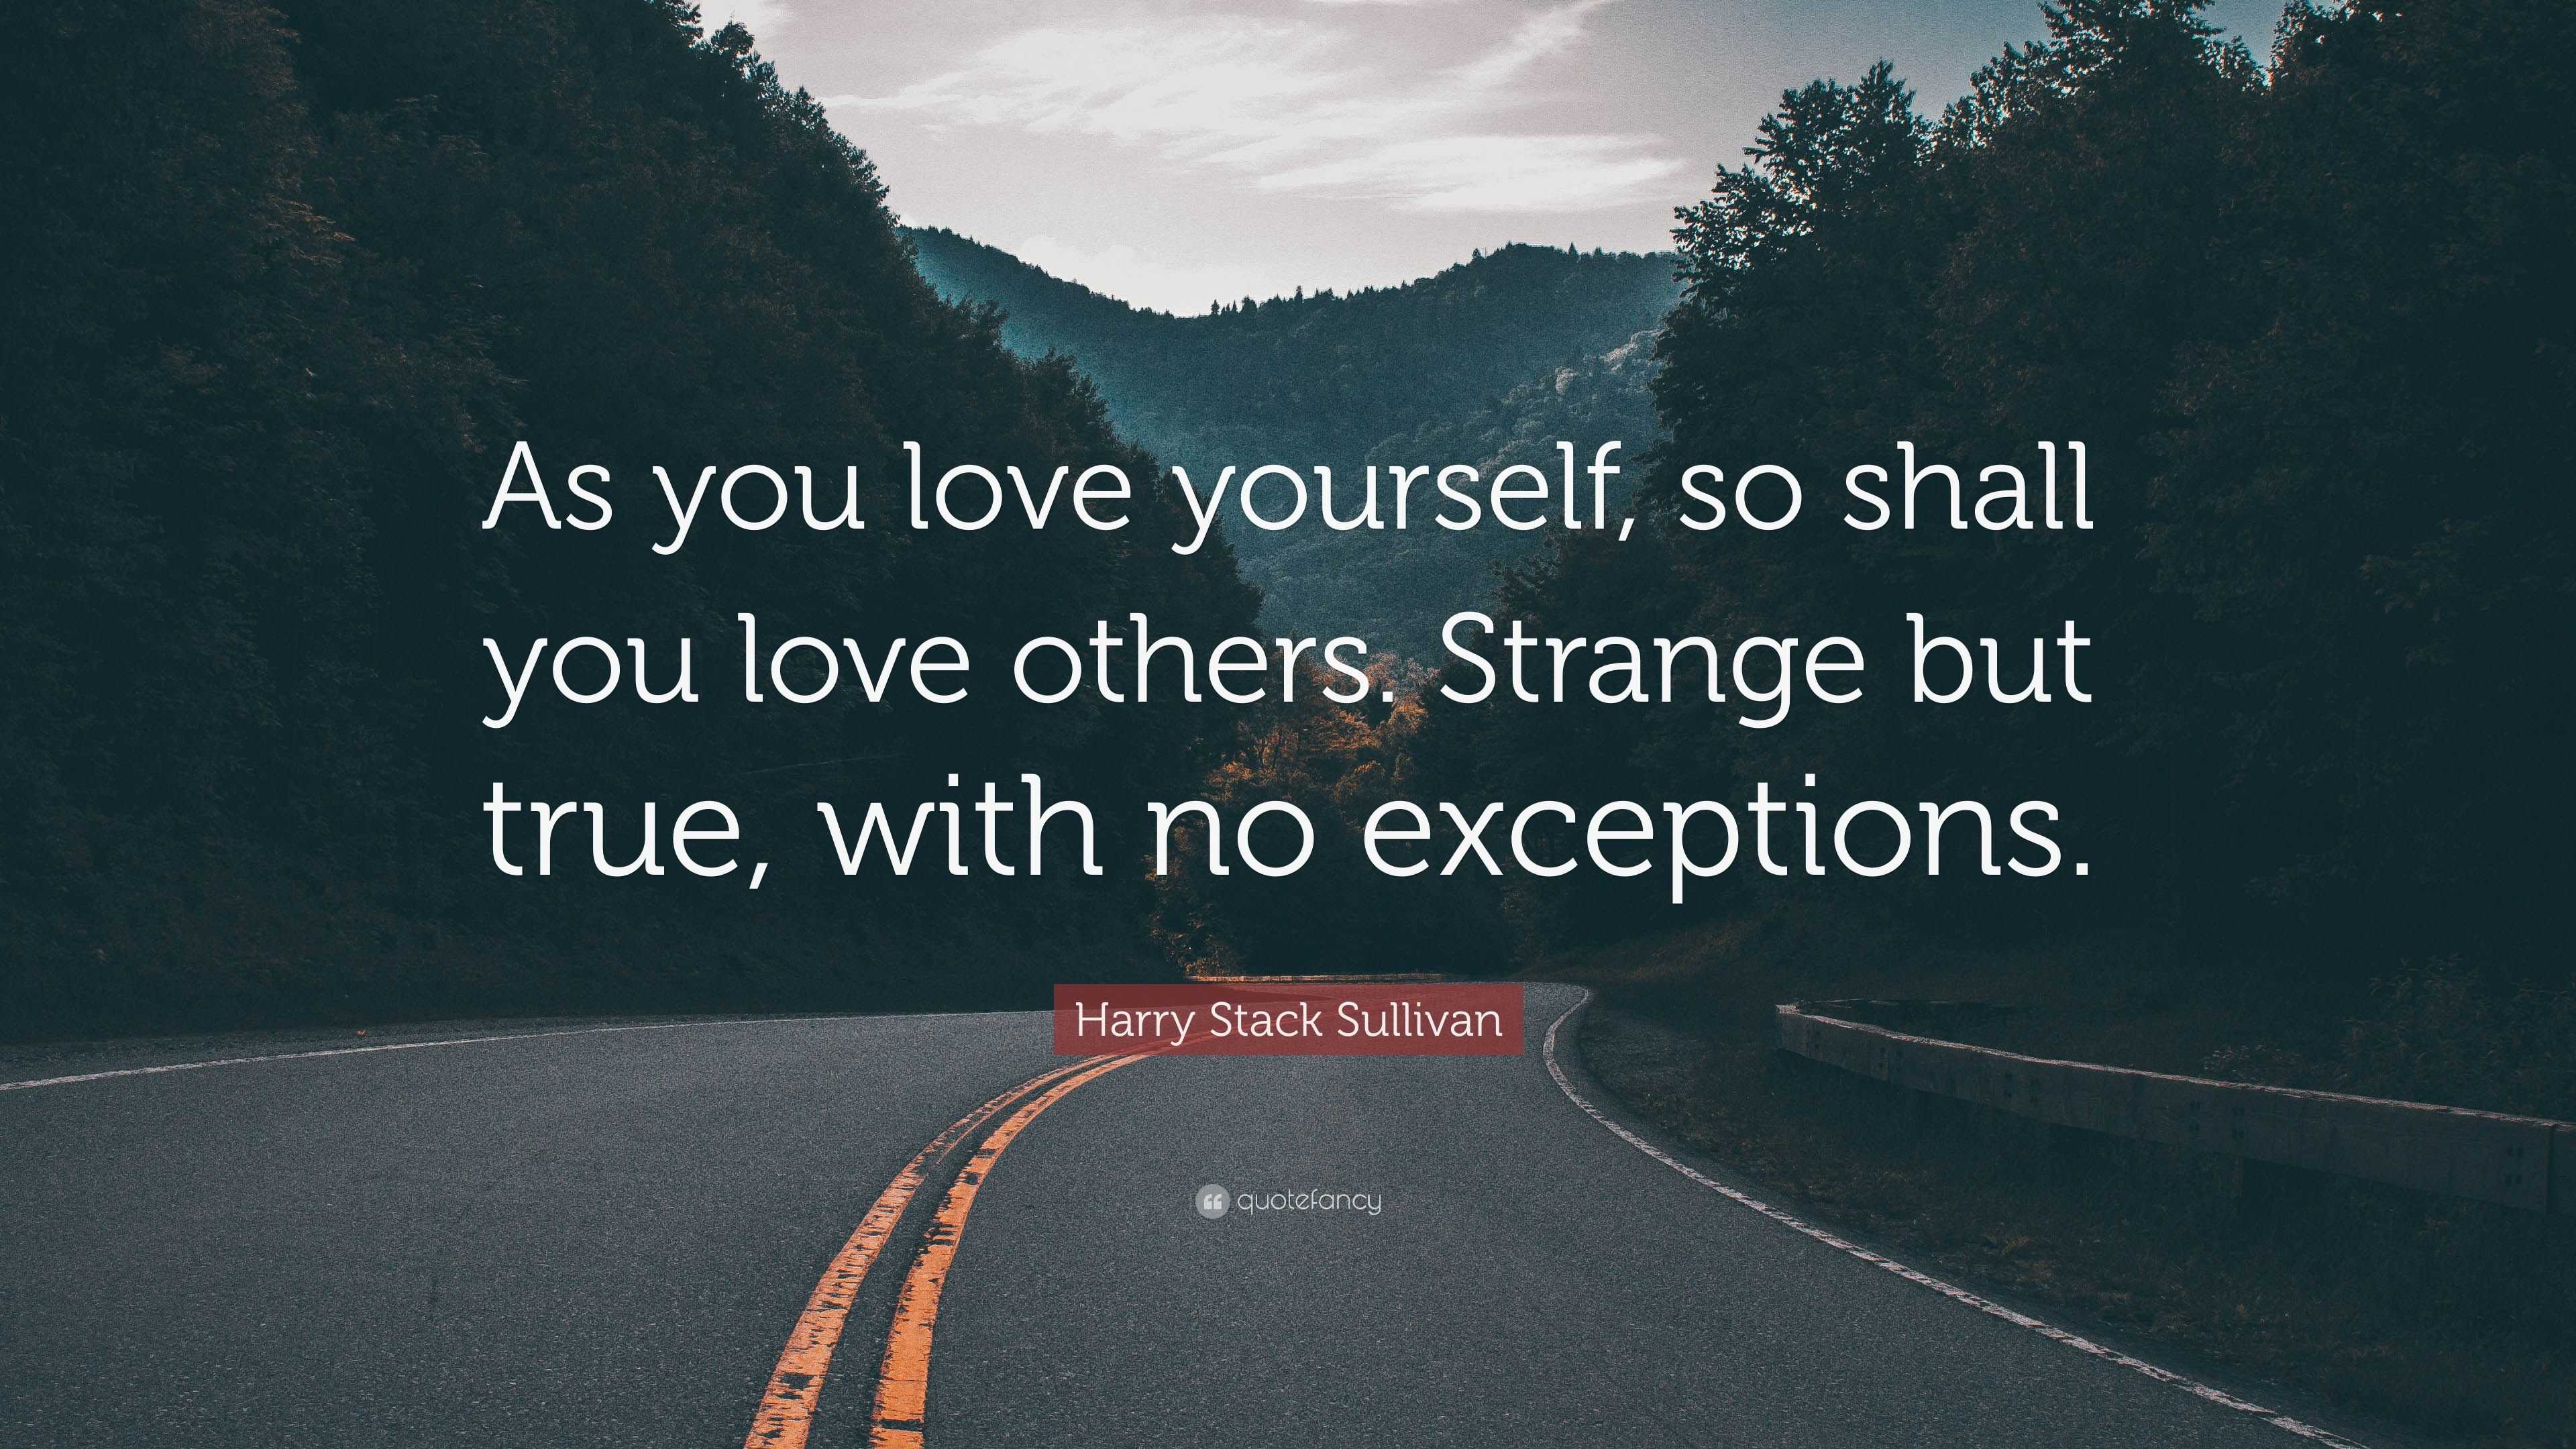 Harry Stack Sullivan Quote: “As you love yourself, so shall you love ...